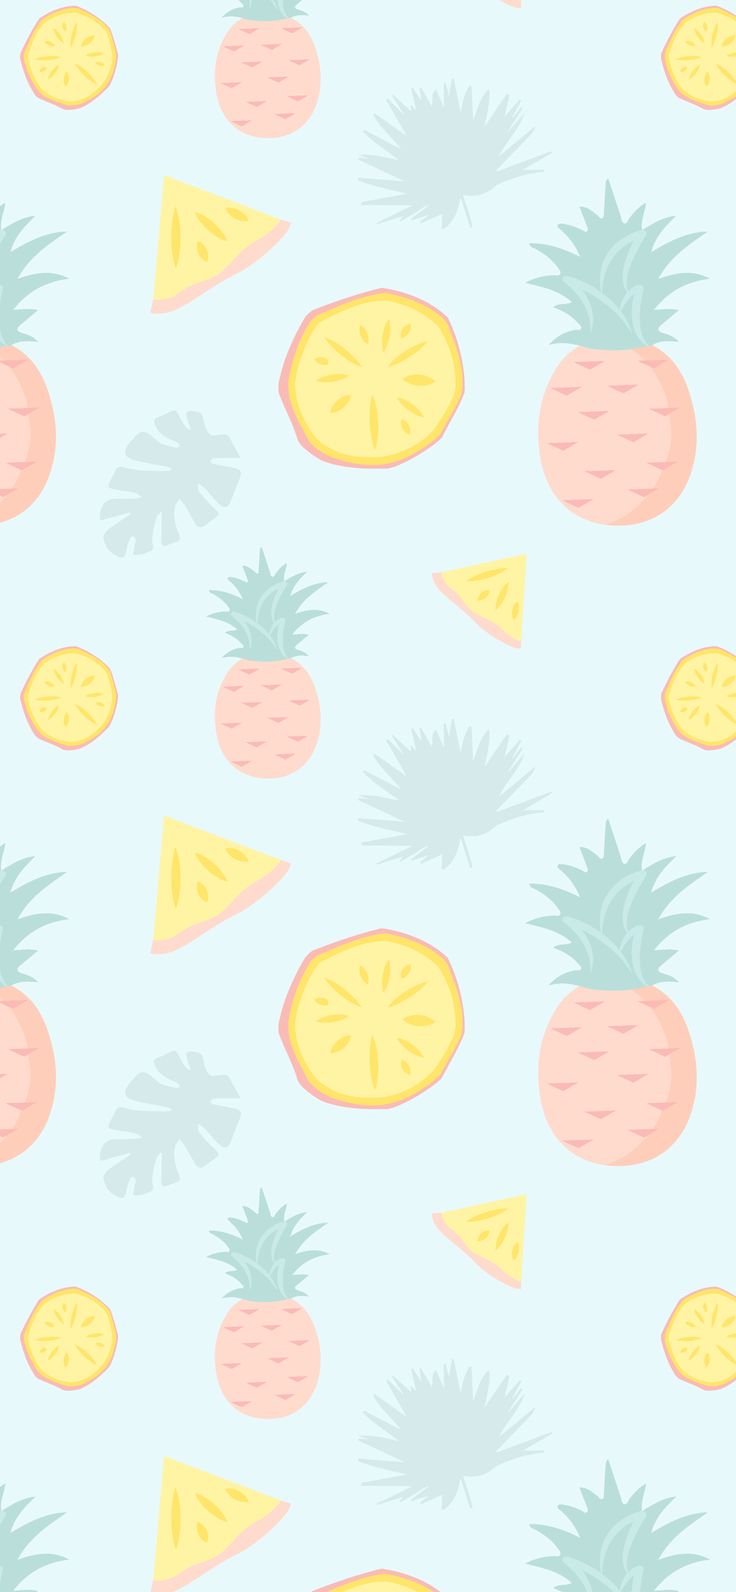 Pineapples iphone background cute summer wallpapers cute pineapple wallpaper pineapple wallpaper